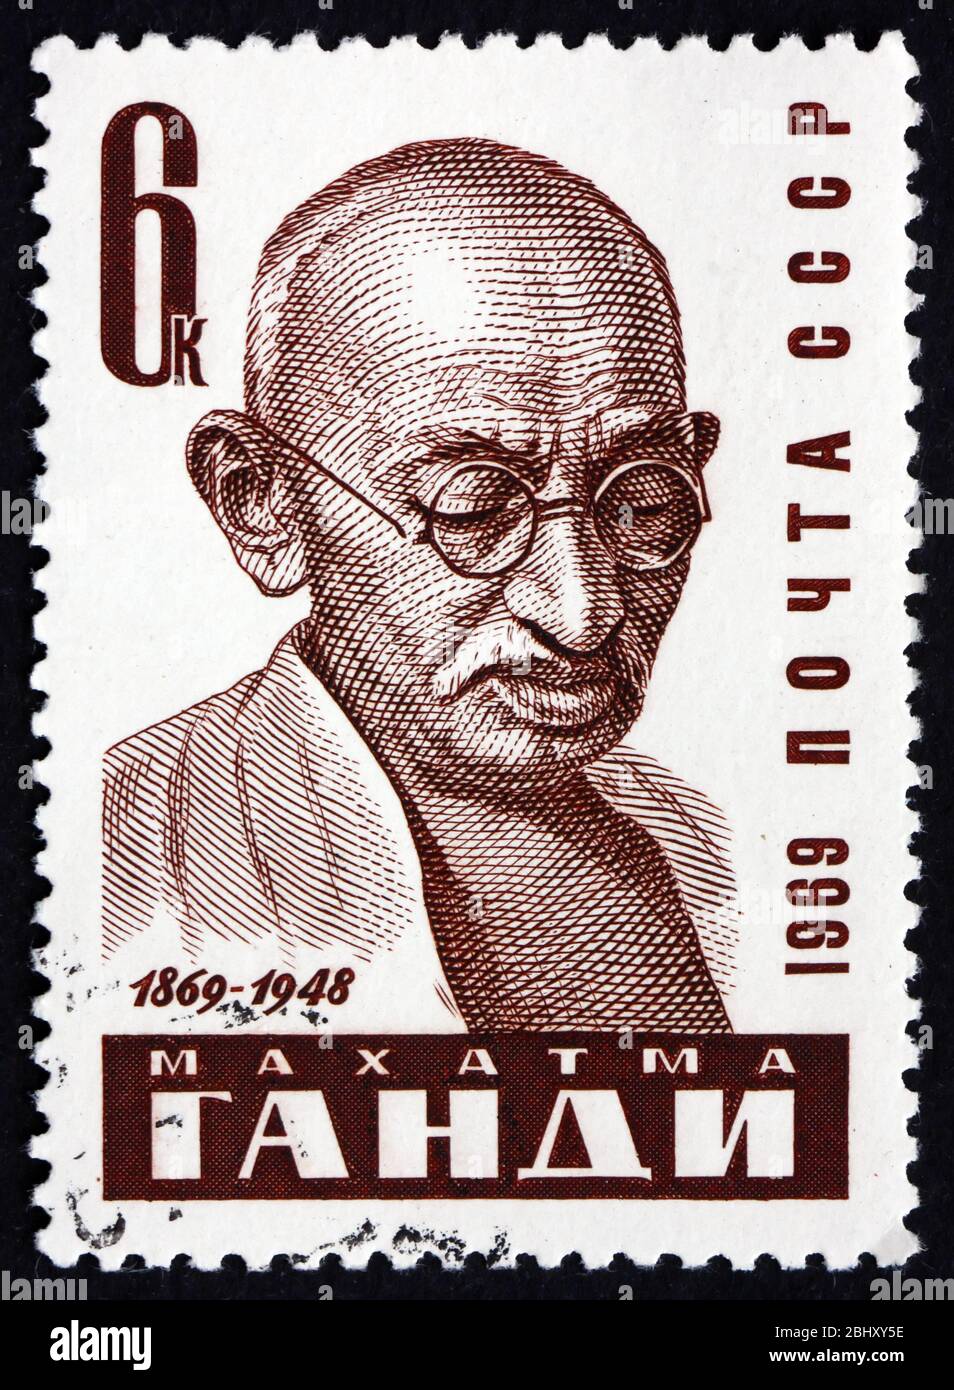 RUSSIA - CIRCA 1969: a stamp printed in the Russia shows Mahatma Gandhi, portrait, leader of Indian independence movement in British-ruled India, circ Stock Photo